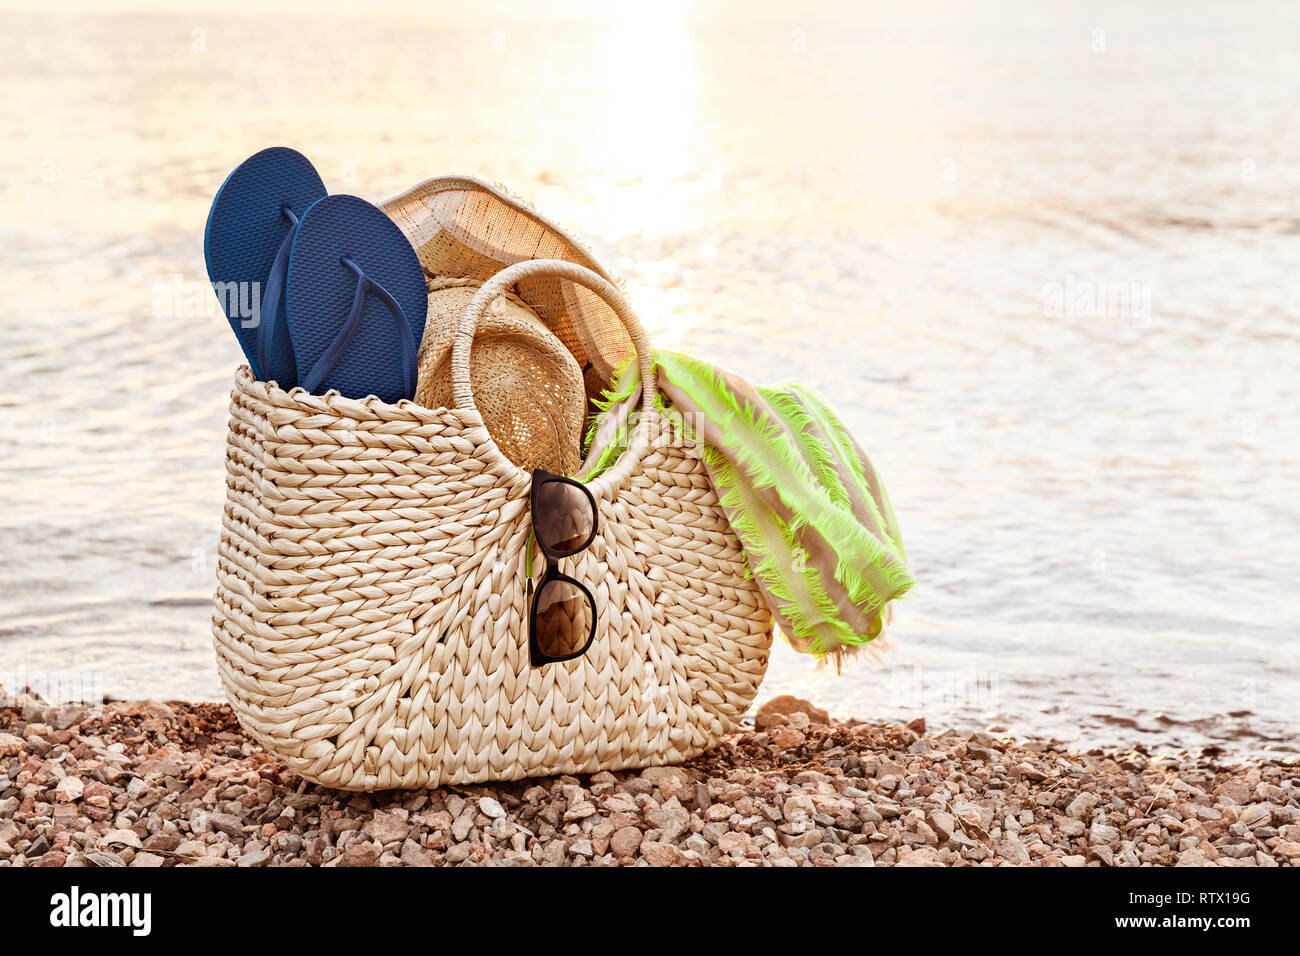 Straw Bag, Hat, Sunglasses And Flip Flops On The Shore At Sunset In The Summer Stock Photo